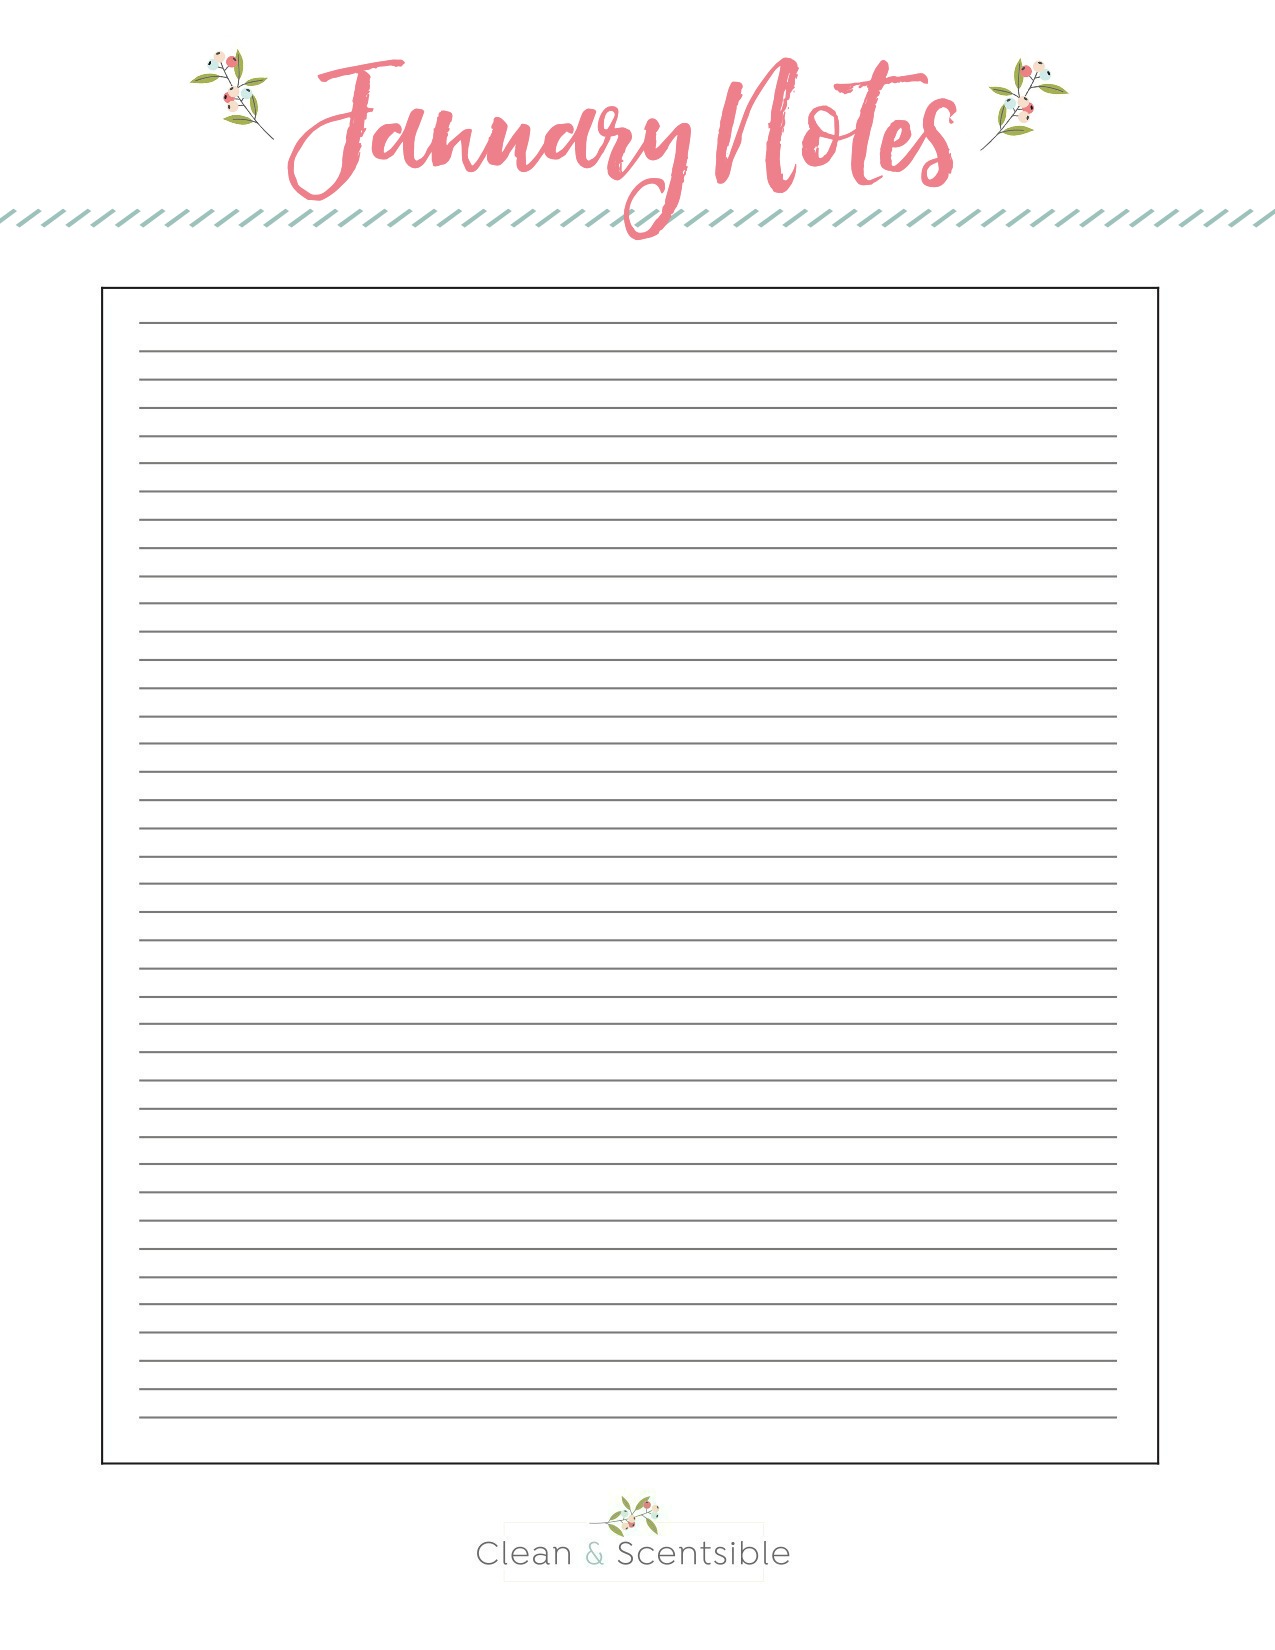 January notes sheet for The Household Organization Diet.